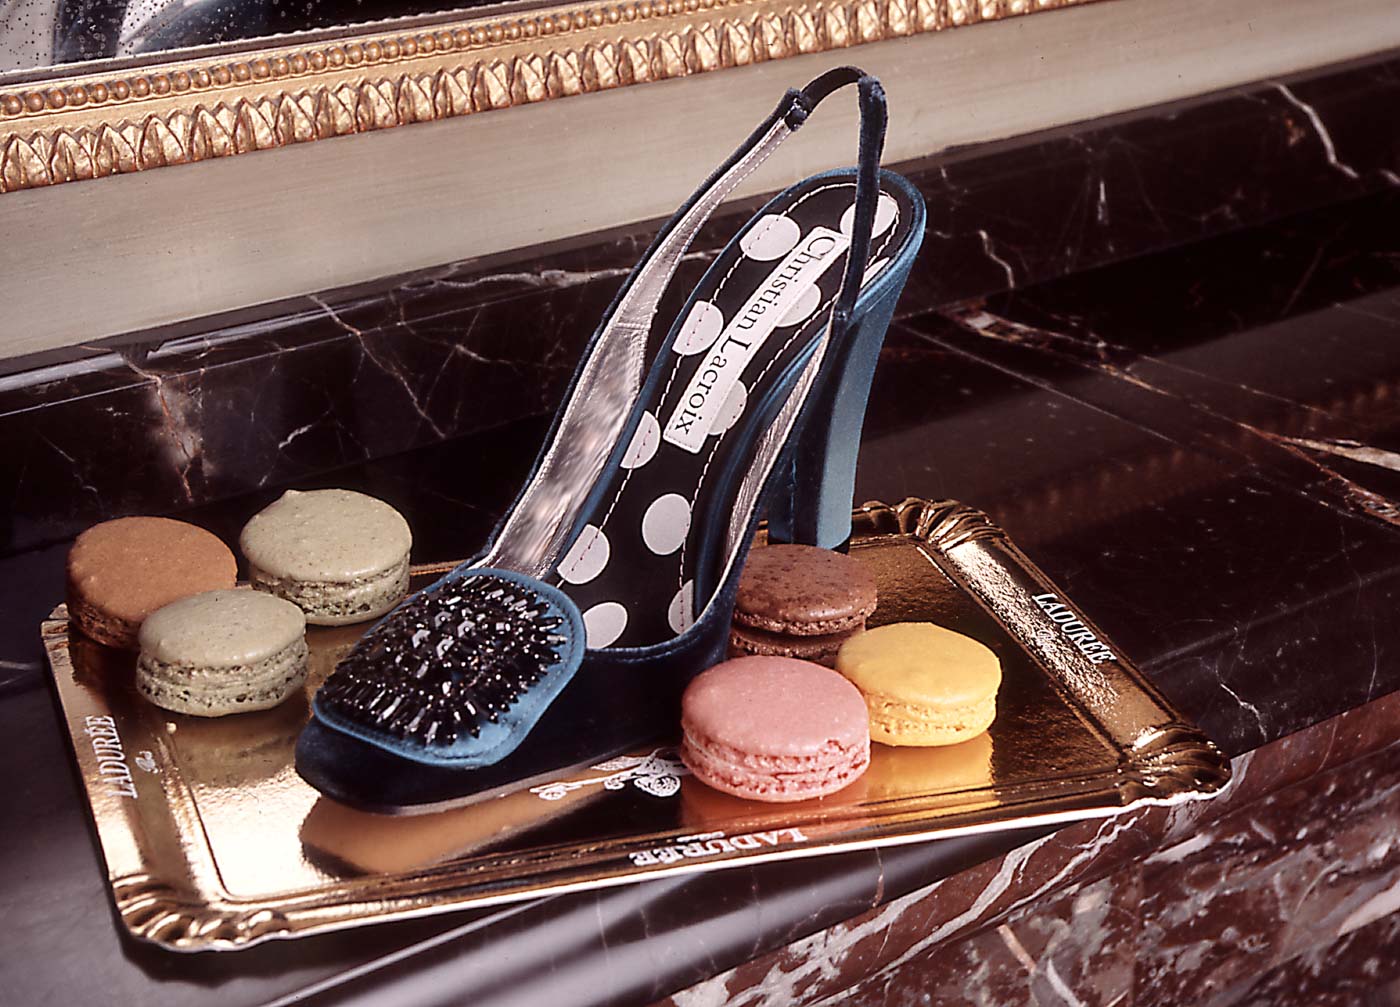 ladies shoe and macarons on serving tray